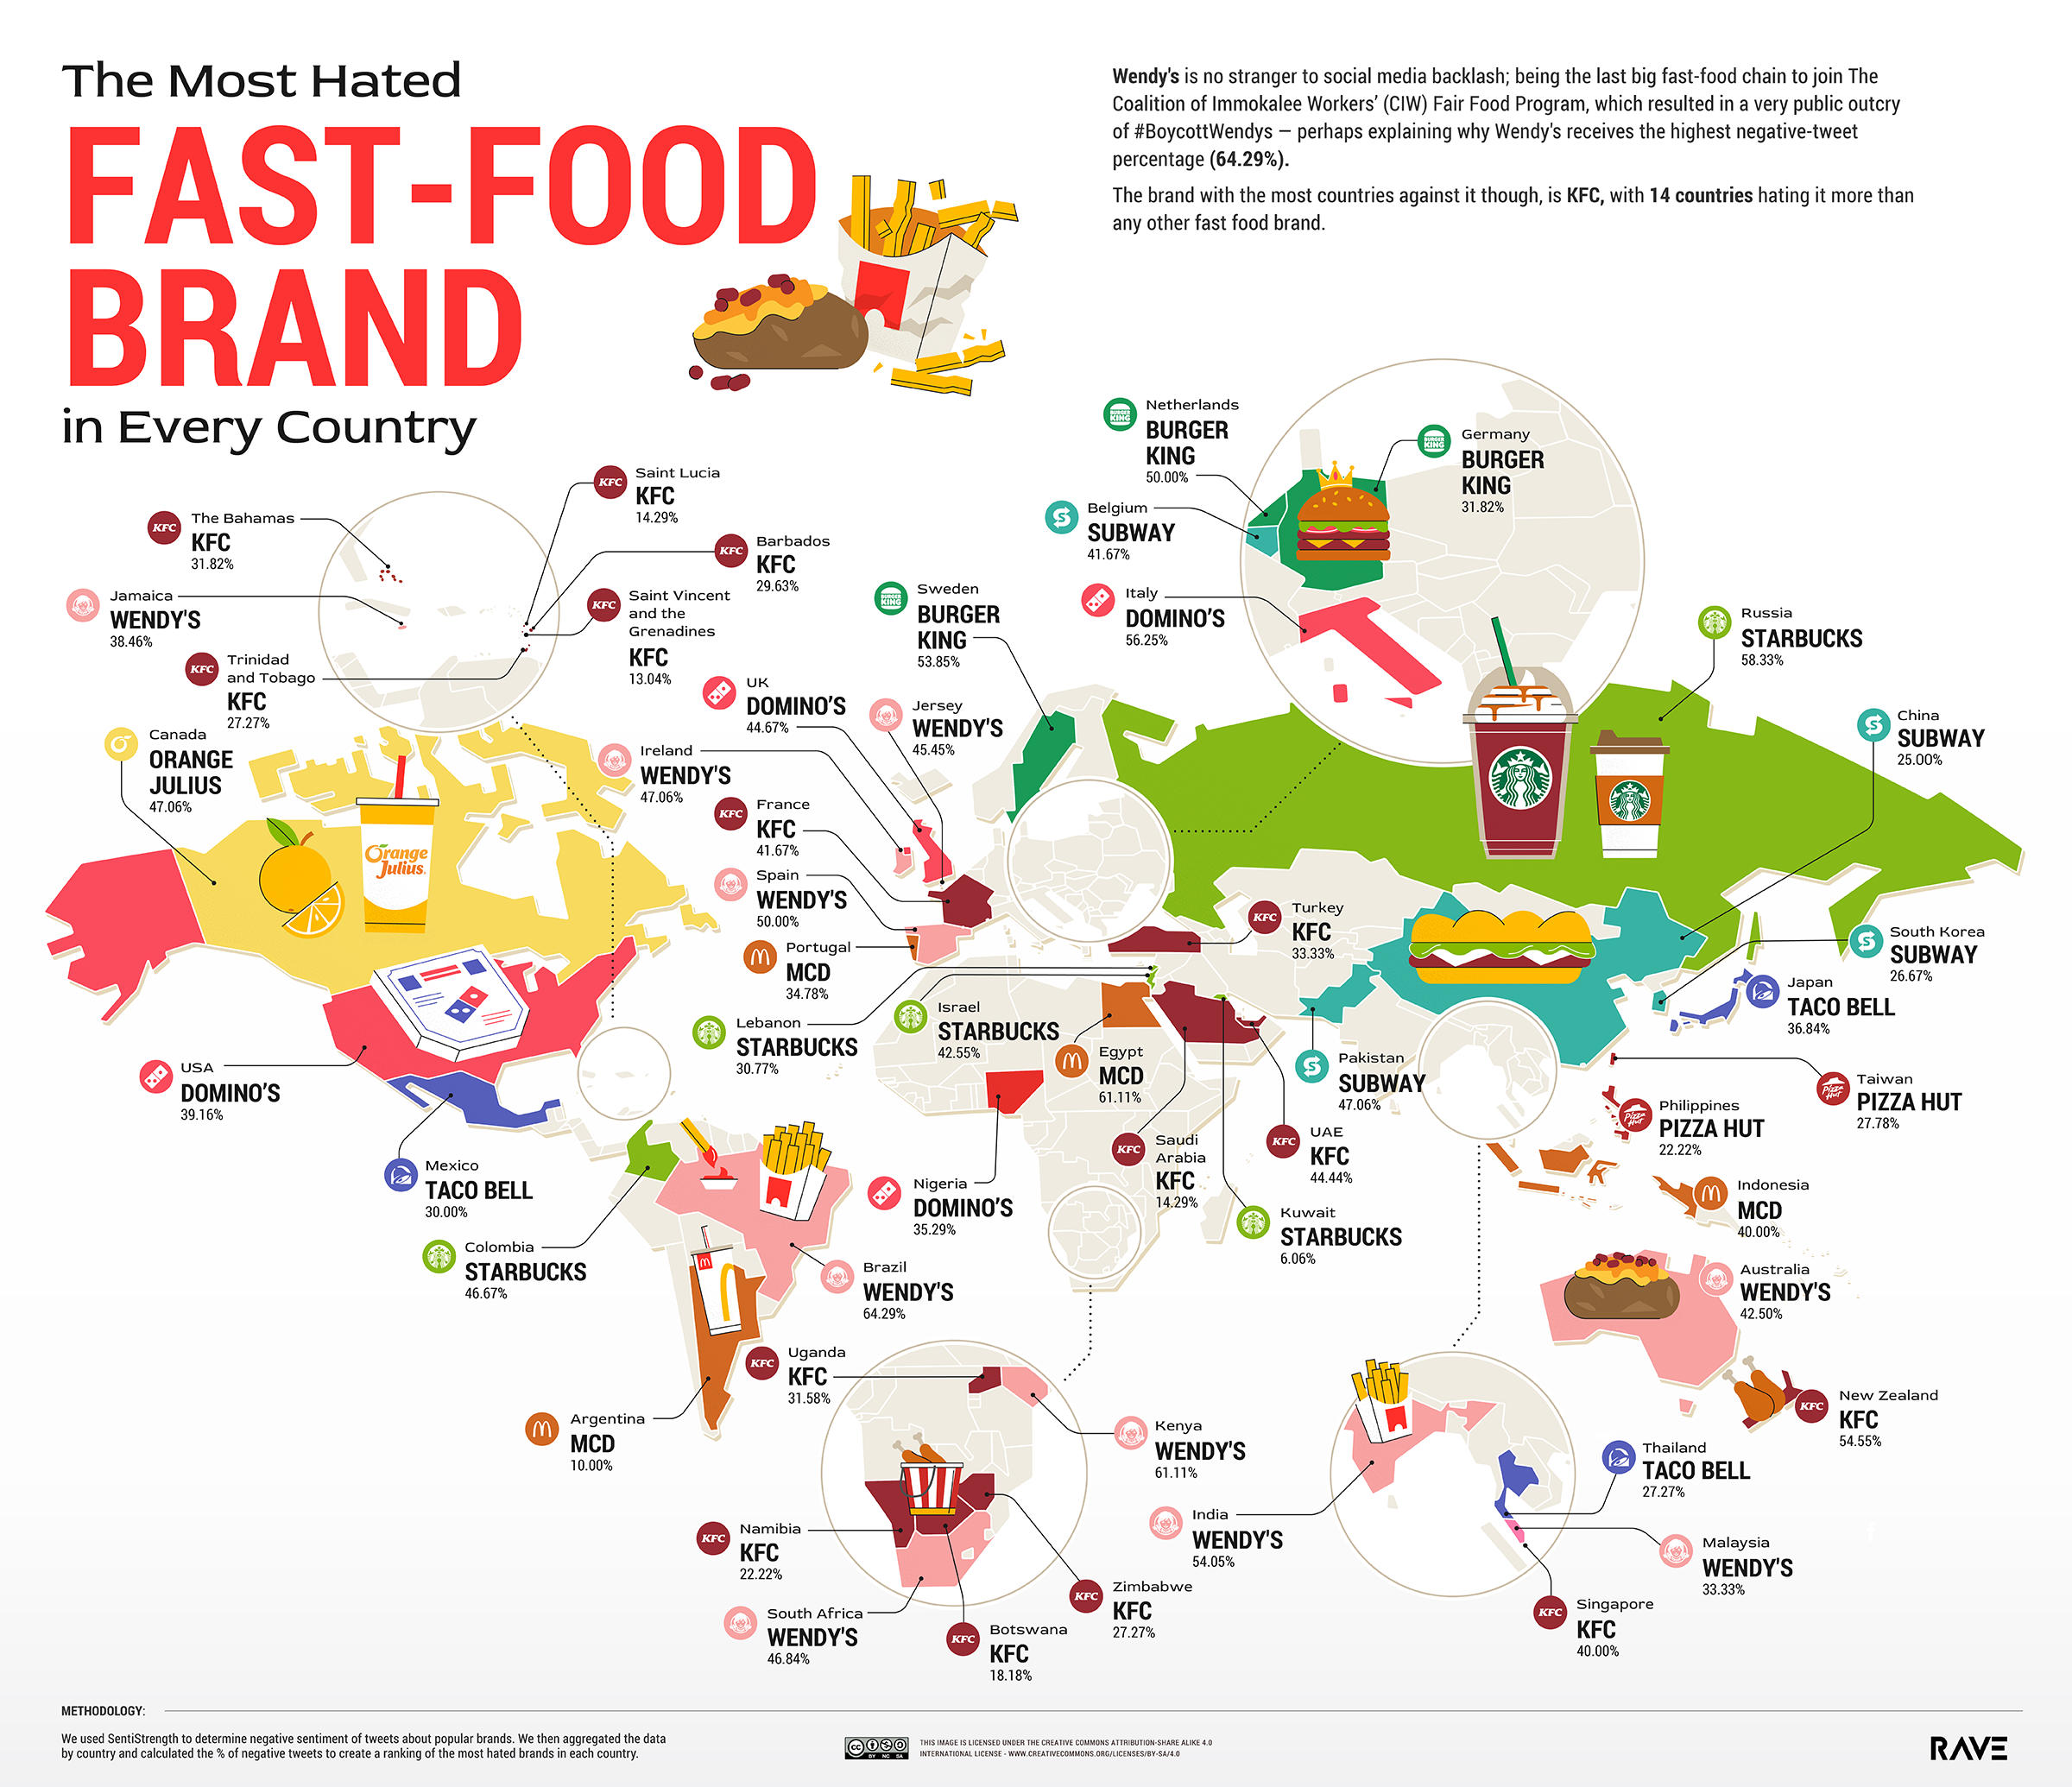 RAVE Reviews world map of most hated fast food brands by country [image provided by RAVE Reviews]